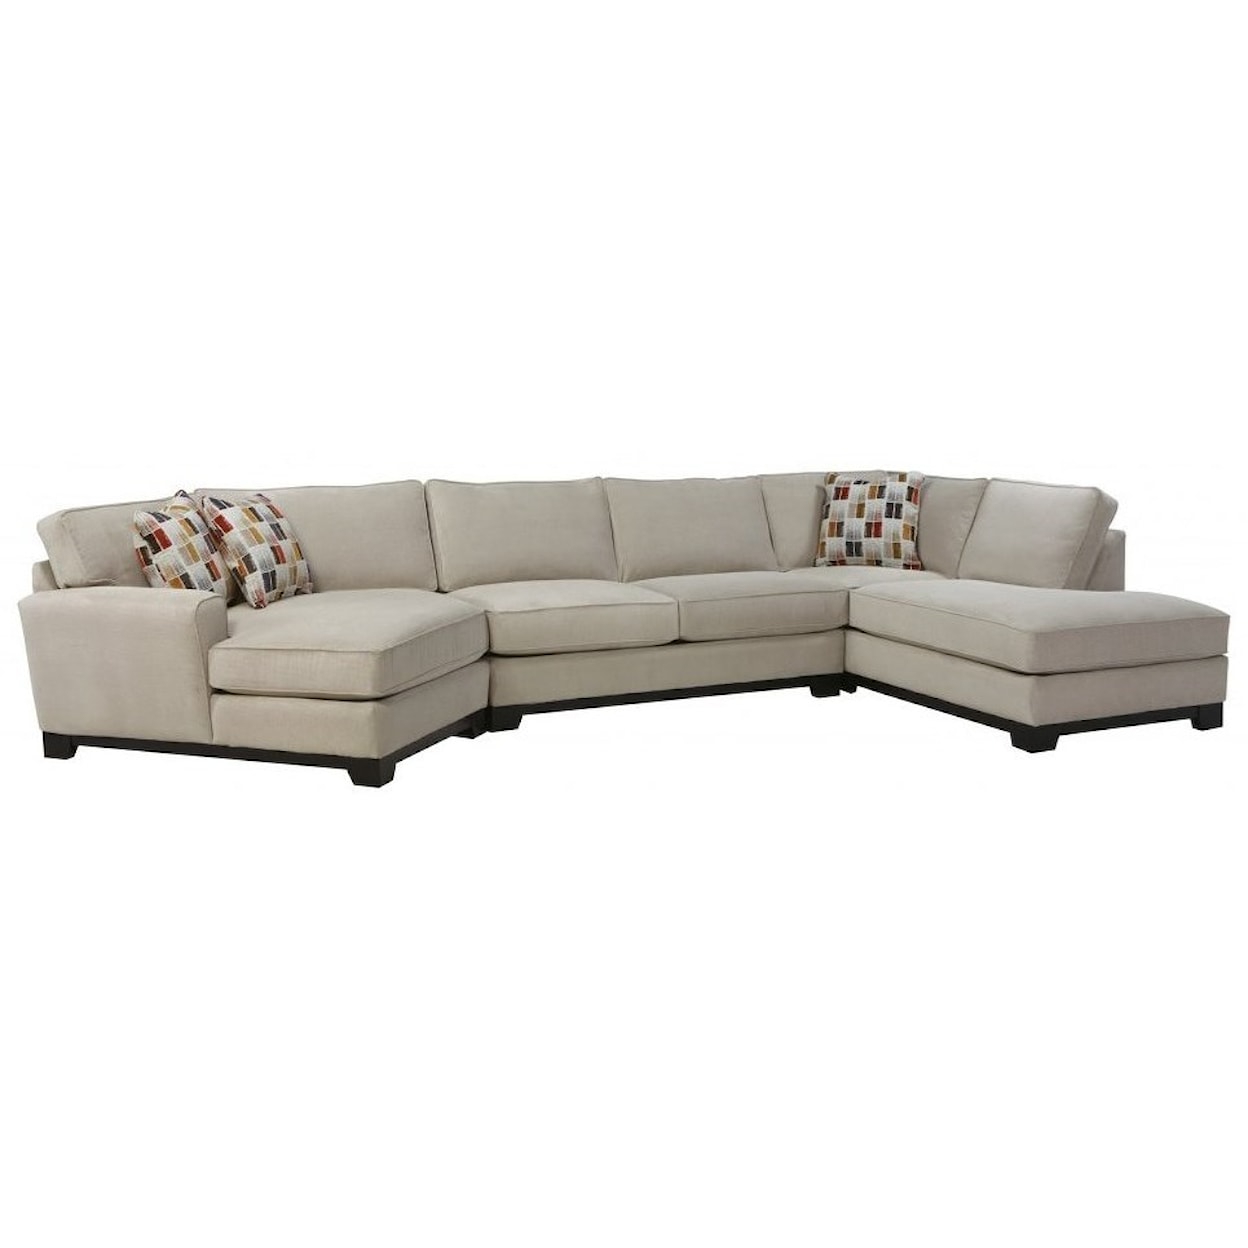 Jonathan Louis Choices - Pisces 4-Piece Chaise Sectional